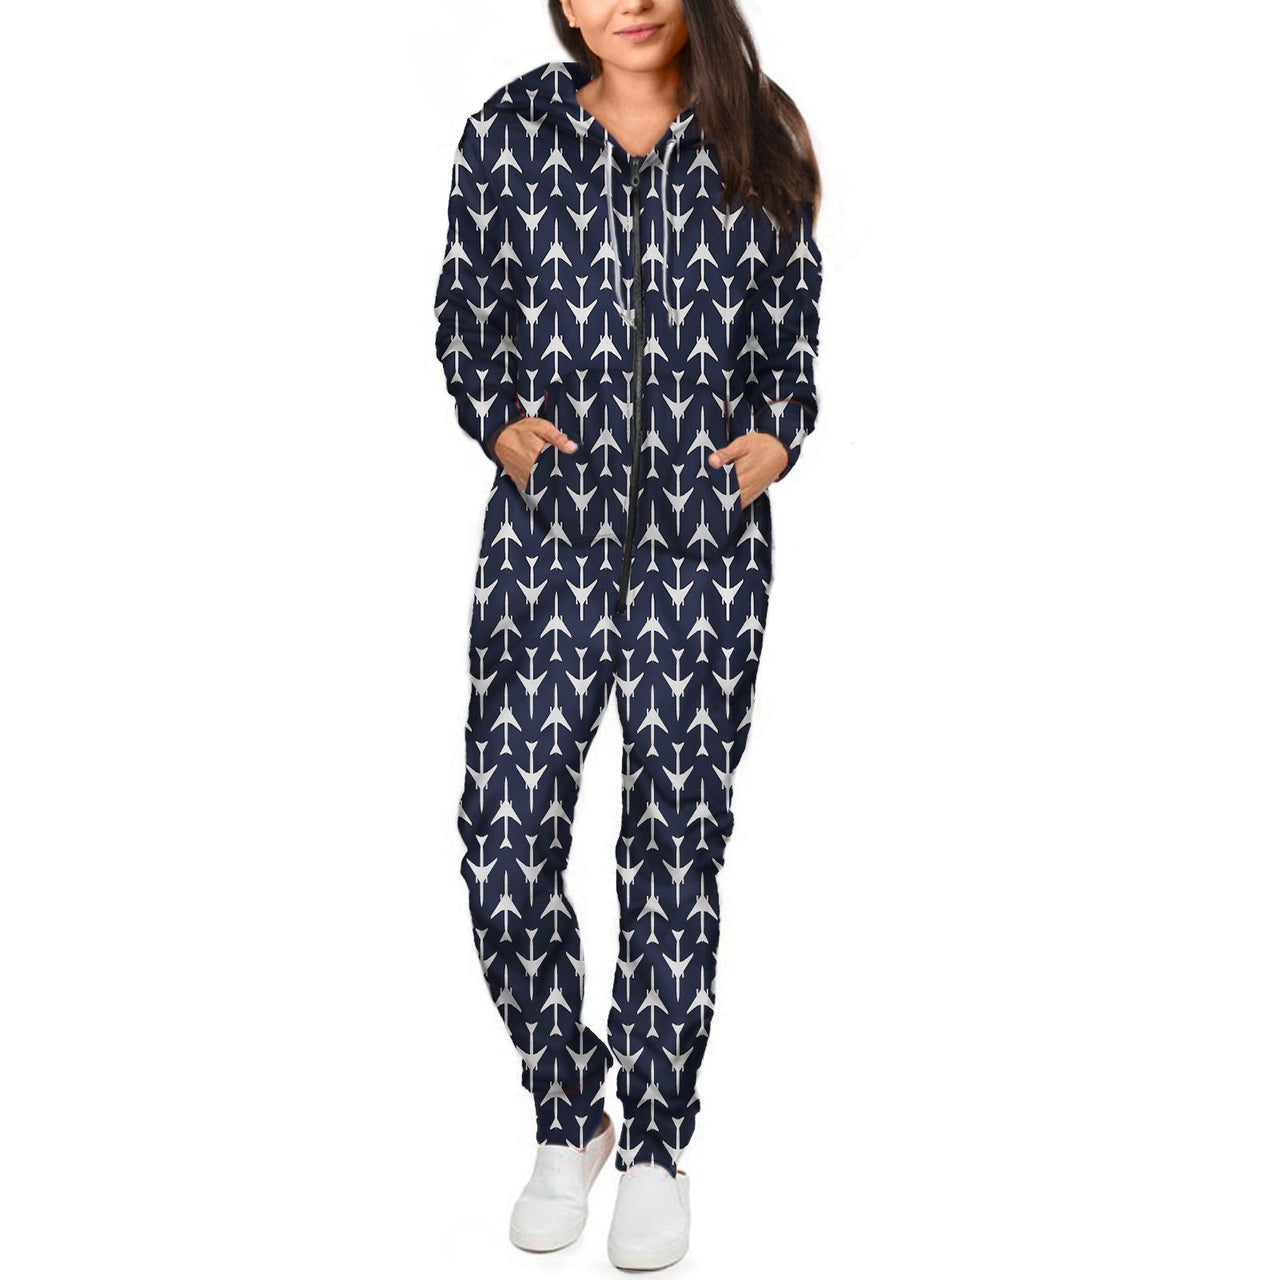 Perfectly Sized Seamless Airplanes Dark Blue Designed Jumpsuit for Men & Women